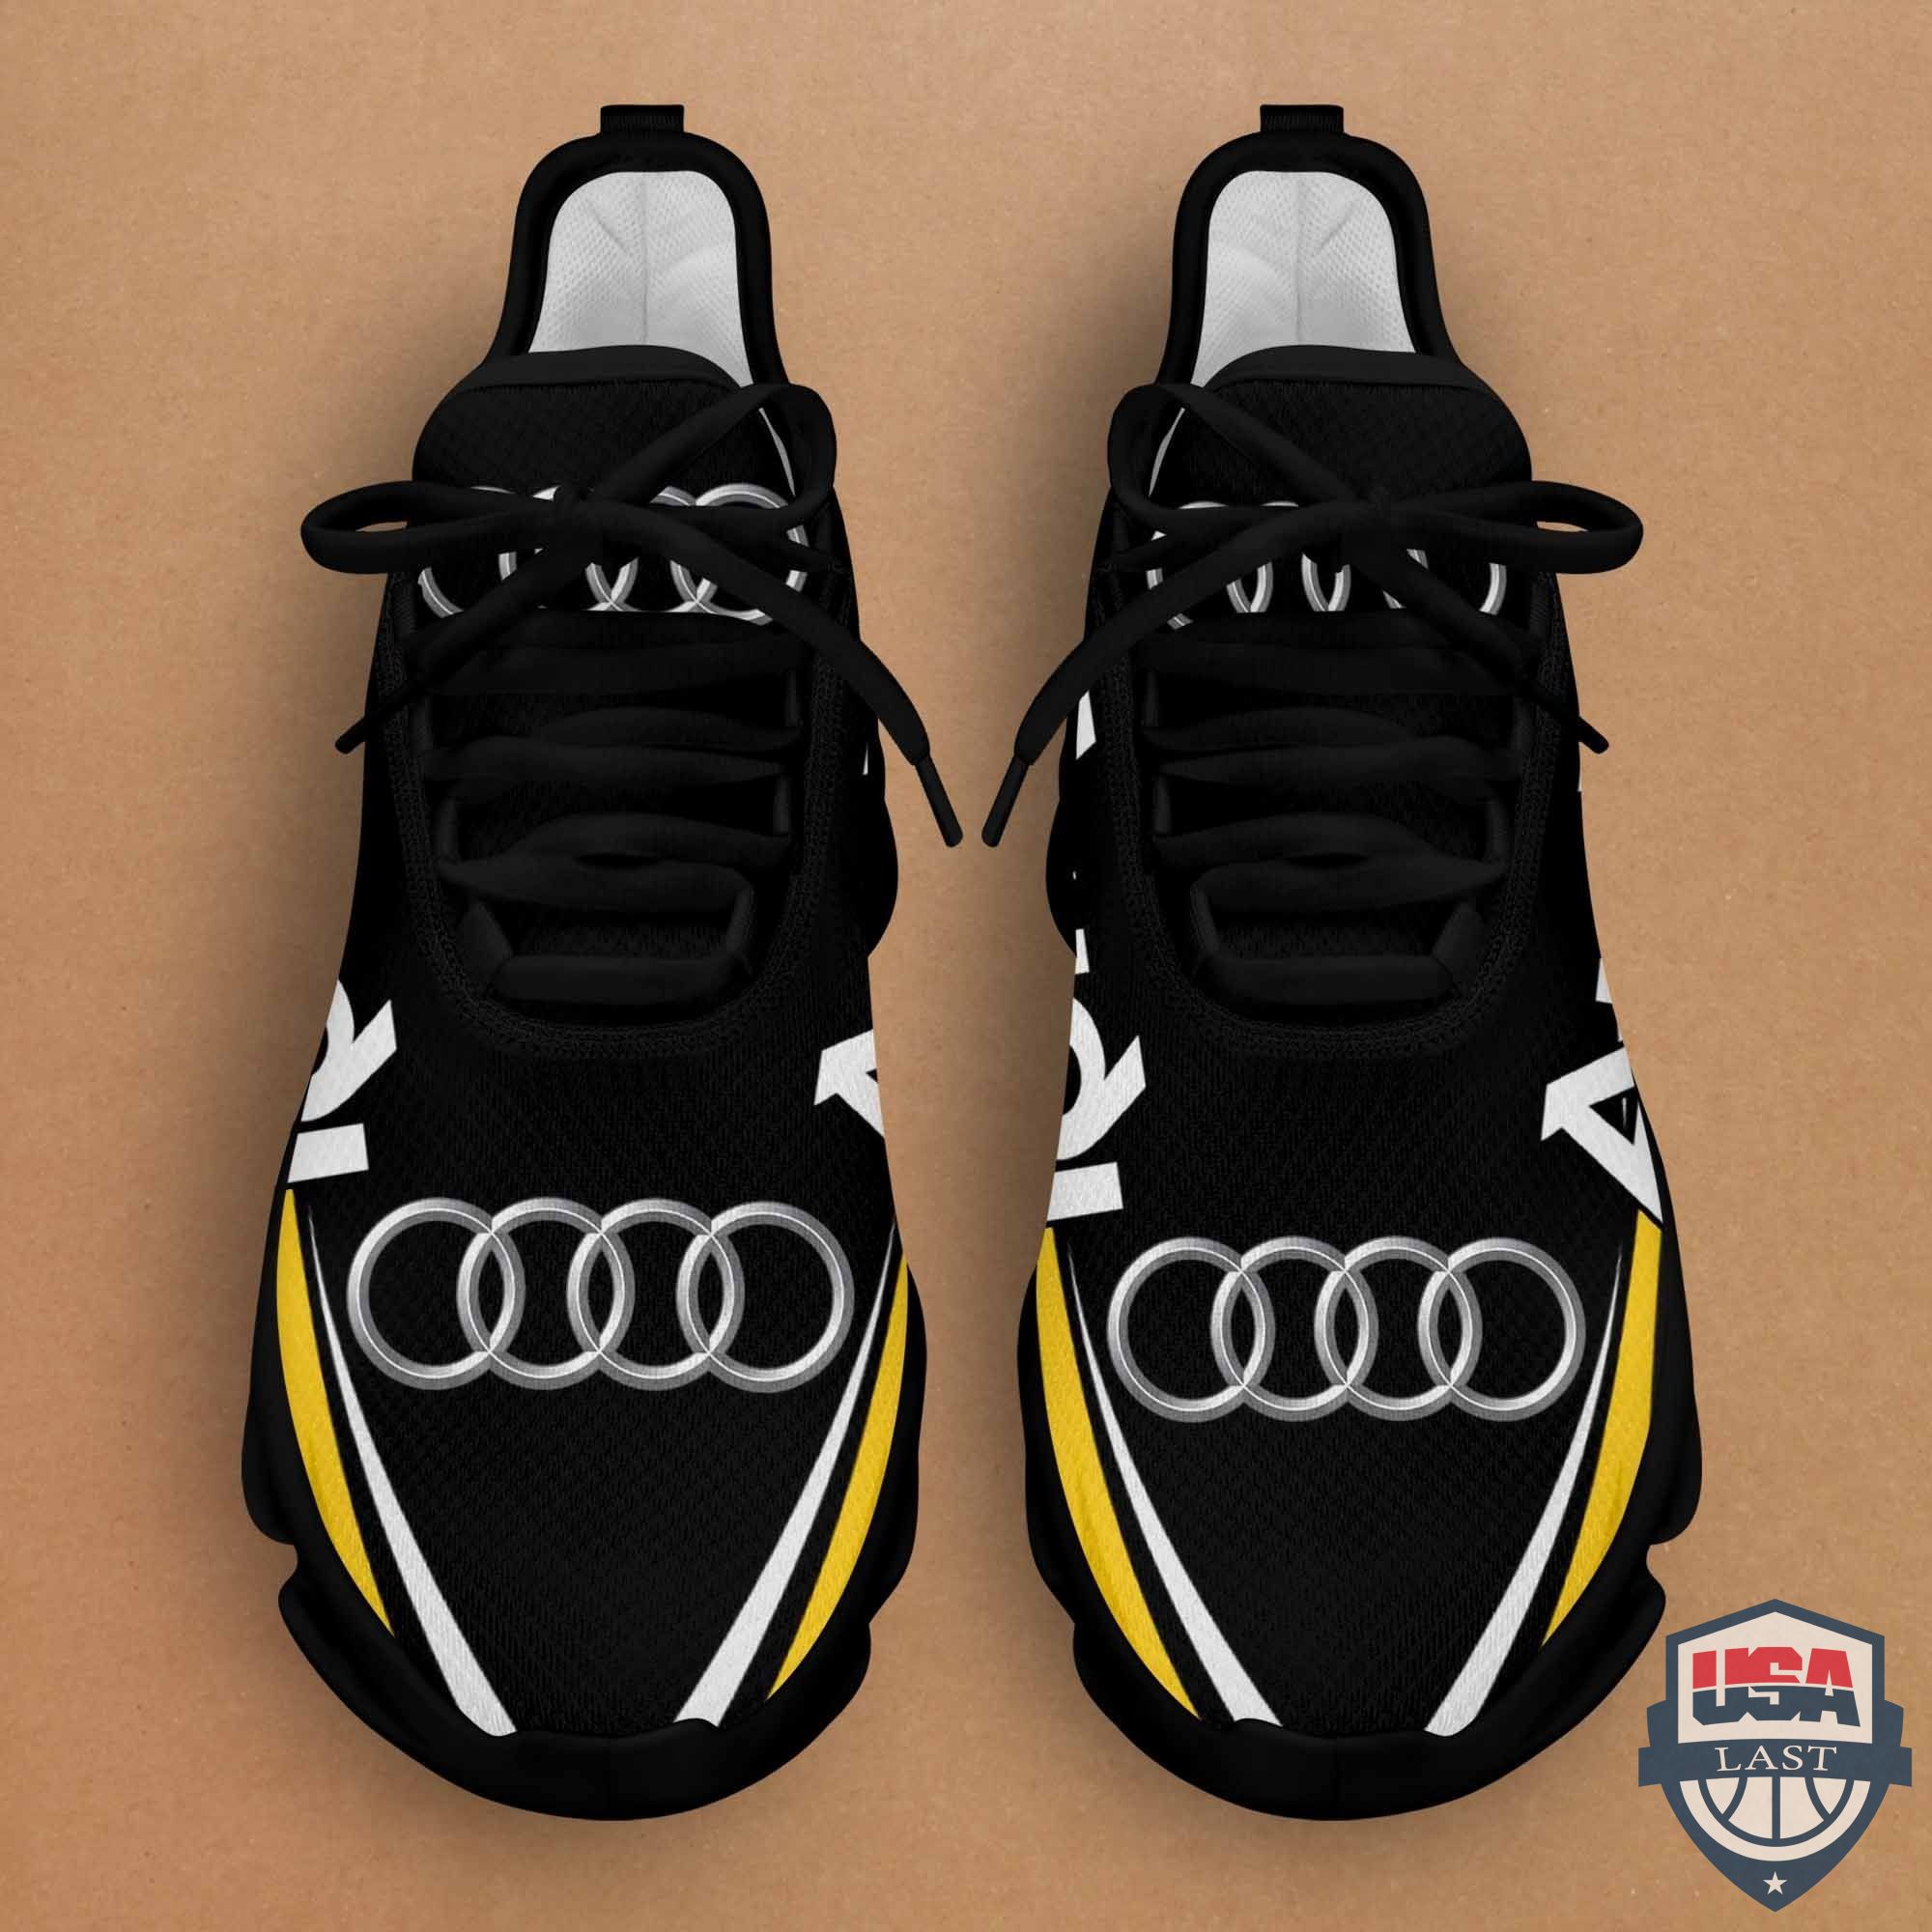 Top Trending – Audi Clunky Running Shoes Yellow Version